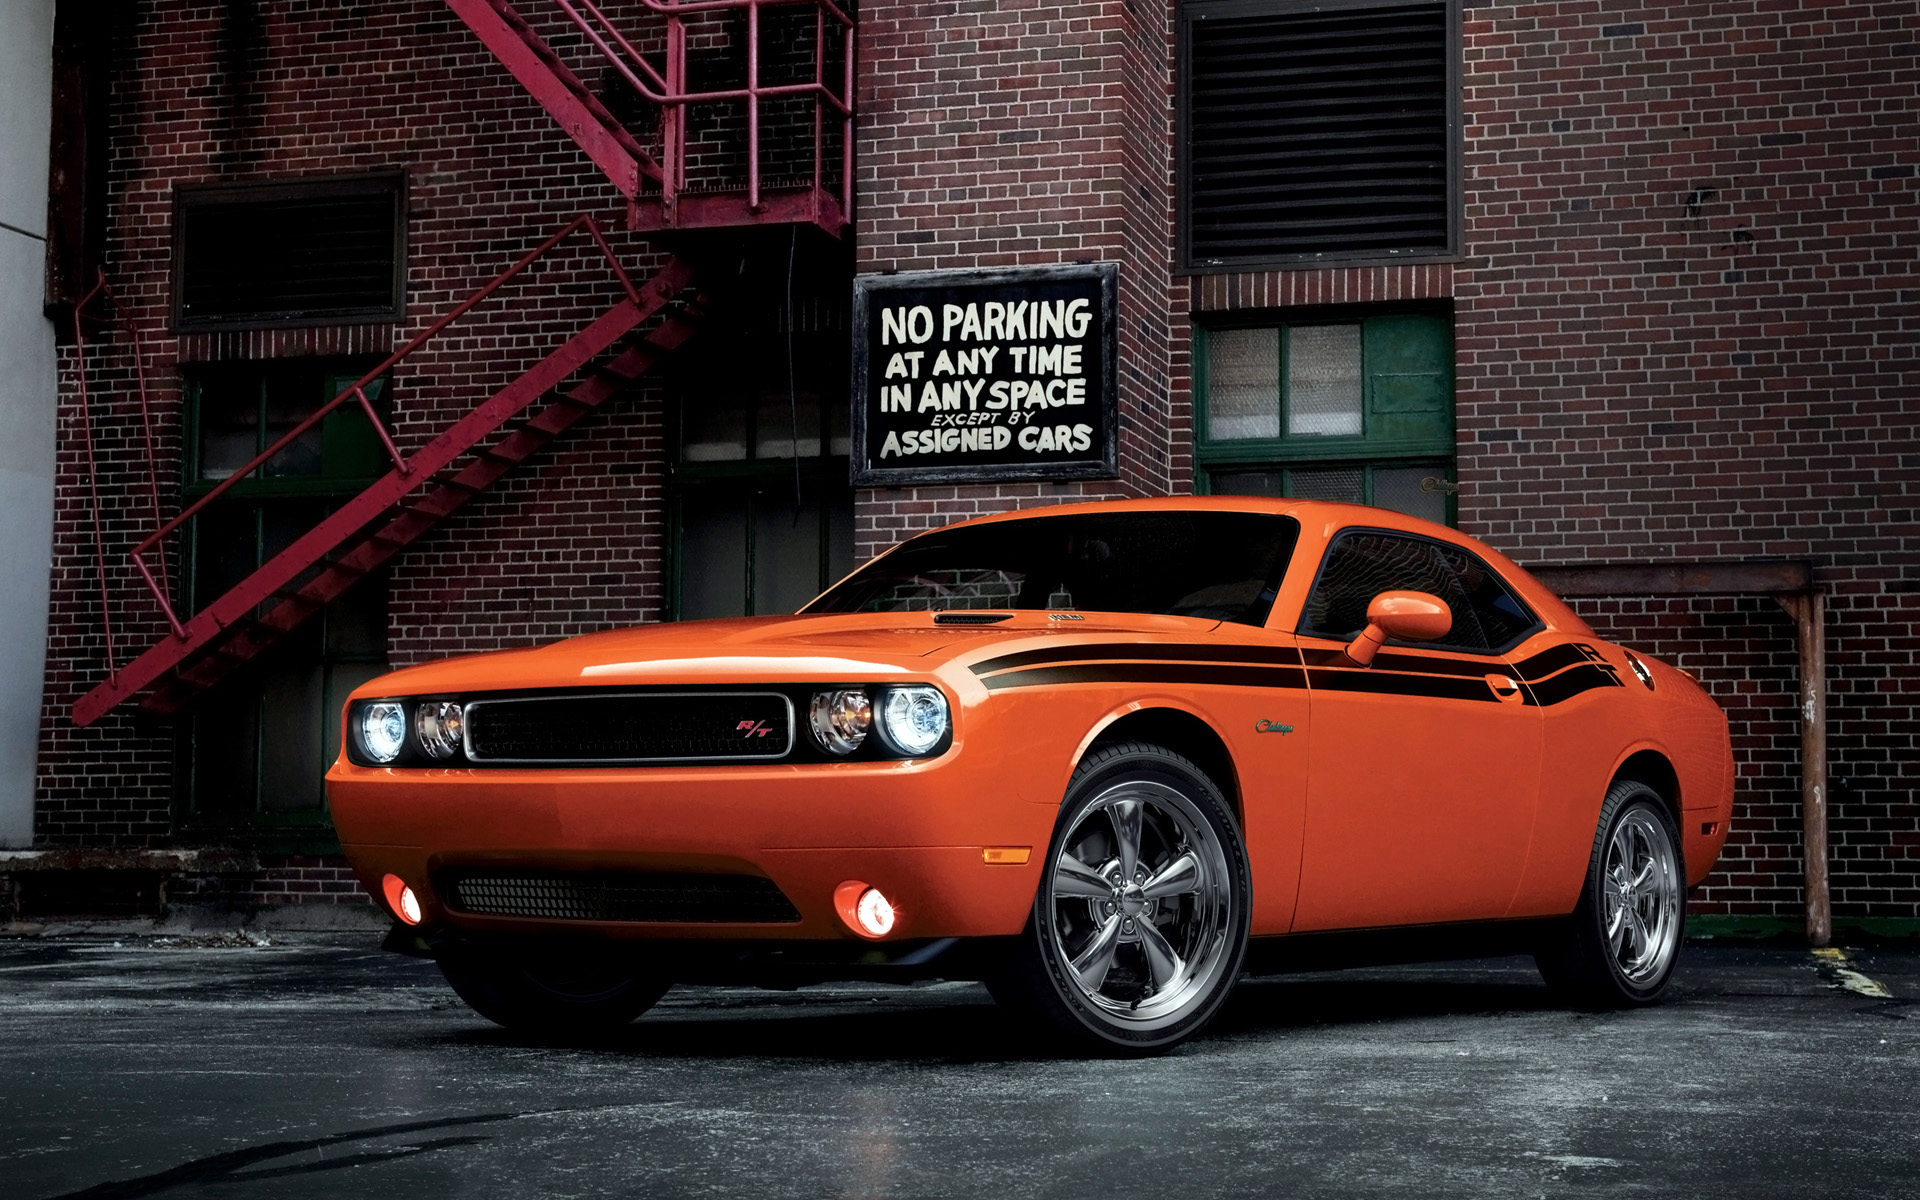 2014 Dodge Challenger RT Classic Wallpapers HD Wallpapers